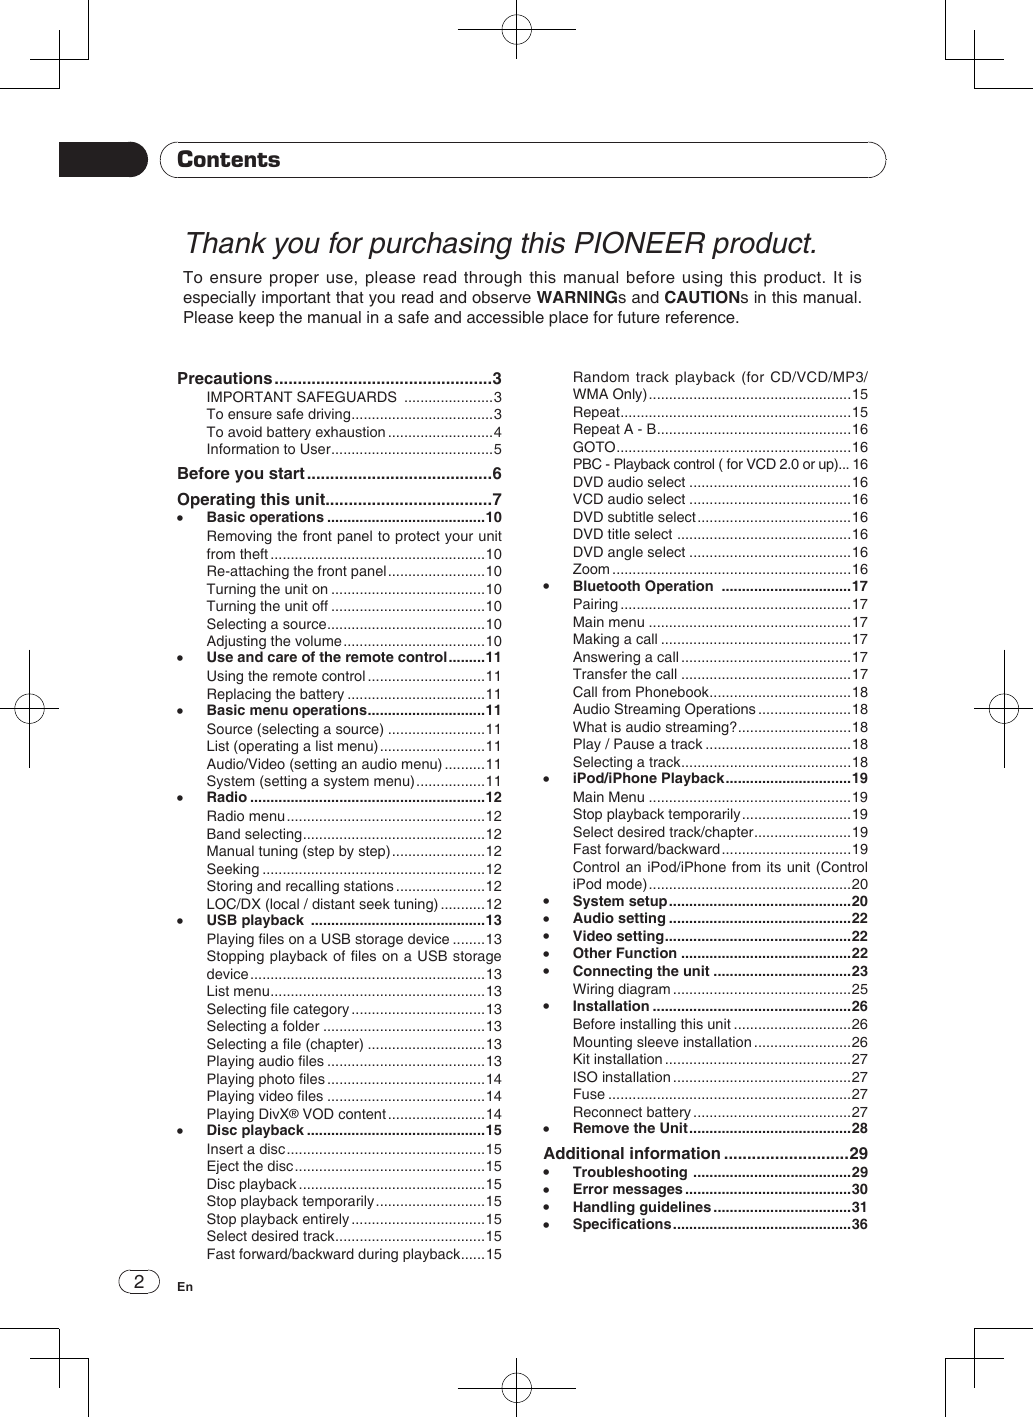 2EnThank you for purchasing this PIONEER product.To ensure proper use, please read through this manual before using this product. It is especially important that you read and observe WARNINGs and CAUTIONs in this manual. Please keep the manual in a safe and accessible place for future reference.ContentsPrecautions ...............................................3IMPORTANT SAFEGUARDS  ......................3To ensure safe driving ...................................3To avoid battery exhaustion ..........................4Information to User ........................................5Before you start ........................................6Operating this unit ....................................7 •Basic operations .......................................10Removing the front panel to protect your unit from theft .....................................................10Re-attaching the front panel ........................10Turning the unit on ......................................10Turning the unit off ......................................10Selecting a source .......................................10Adjusting the volume ...................................10 •Use and care of the remote control .........11Using the remote control .............................11Replacing the battery ..................................11 •Basic menu operations .............................11Source (selecting a source) ........................11List (operating a list menu) ..........................11Audio/Video (setting an audio menu) ..........11System (setting a system menu) .................11 •Radio ..........................................................12Radio menu .................................................12Band selecting .............................................12Manual tuning (step by step) .......................12Seeking .......................................................12Storing and recalling stations ......................12LOC/DX (local / distant seek tuning) ...........12 •USB playback  ...........................................13Playing les on a USB storage device ........13Stopping playback of les on a USB storage device ..........................................................13List menu .....................................................13Selecting le category .................................13Selecting a folder ........................................13Selecting a le (chapter) .............................13Playing audio les .......................................13Playing photo les .......................................14Playing video les .......................................14Playing DivX® VOD content ........................14 •Disc playback ............................................15Insert a disc .................................................15Eject the disc ...............................................15Disc playback ..............................................15Stop playback temporarily ...........................15Stop playback entirely .................................15Select desired track .....................................15Fast forward/backward during playback ......15Random track playback (for CD/VCD/MP3/WMA Only) ..................................................15Repeat .........................................................15Repeat A - B ................................................16GOTO ..........................................................16PBC - Playback control ( for VCD 2.0 or up)... 16DVD audio select ........................................16VCD audio select ........................................16DVD subtitle select ......................................16DVD title select  ...........................................16DVD angle select ........................................16Zoom ...........................................................16 •Bluetooth Operation  ................................17Pairing .........................................................17Main menu ..................................................17Making a call ...............................................17Answering a call ..........................................17Transfer the call ..........................................17Call from Phonebook ...................................18Audio Streaming Operations .......................18What is audio streaming? ............................18Play / Pause a track ....................................18Selecting a track ..........................................18 •iPod/iPhone Playback ...............................19Main Menu ..................................................19Stop playback temporarily ...........................19Select desired track/chapter ........................19Fast forward/backward ................................19Control an iPod/iPhone from its unit (Control iPod mode) ..................................................20 •System setup .............................................20 •Audio setting .............................................22 •Video setting ..............................................22 •Other Function ..........................................22 •Connecting the unit ..................................23Wiring diagram ............................................25 •Installation .................................................26Before installing this unit .............................26Mounting sleeve installation ........................26Kit installation ..............................................27ISO installation ............................................27Fuse ............................................................27Reconnect battery .......................................27 •Remove the Unit ........................................28Additional information ...........................29 •Troubleshooting  .......................................29 •Error messages .........................................30 •Handling guidelines ..................................31 •Specications ............................................36